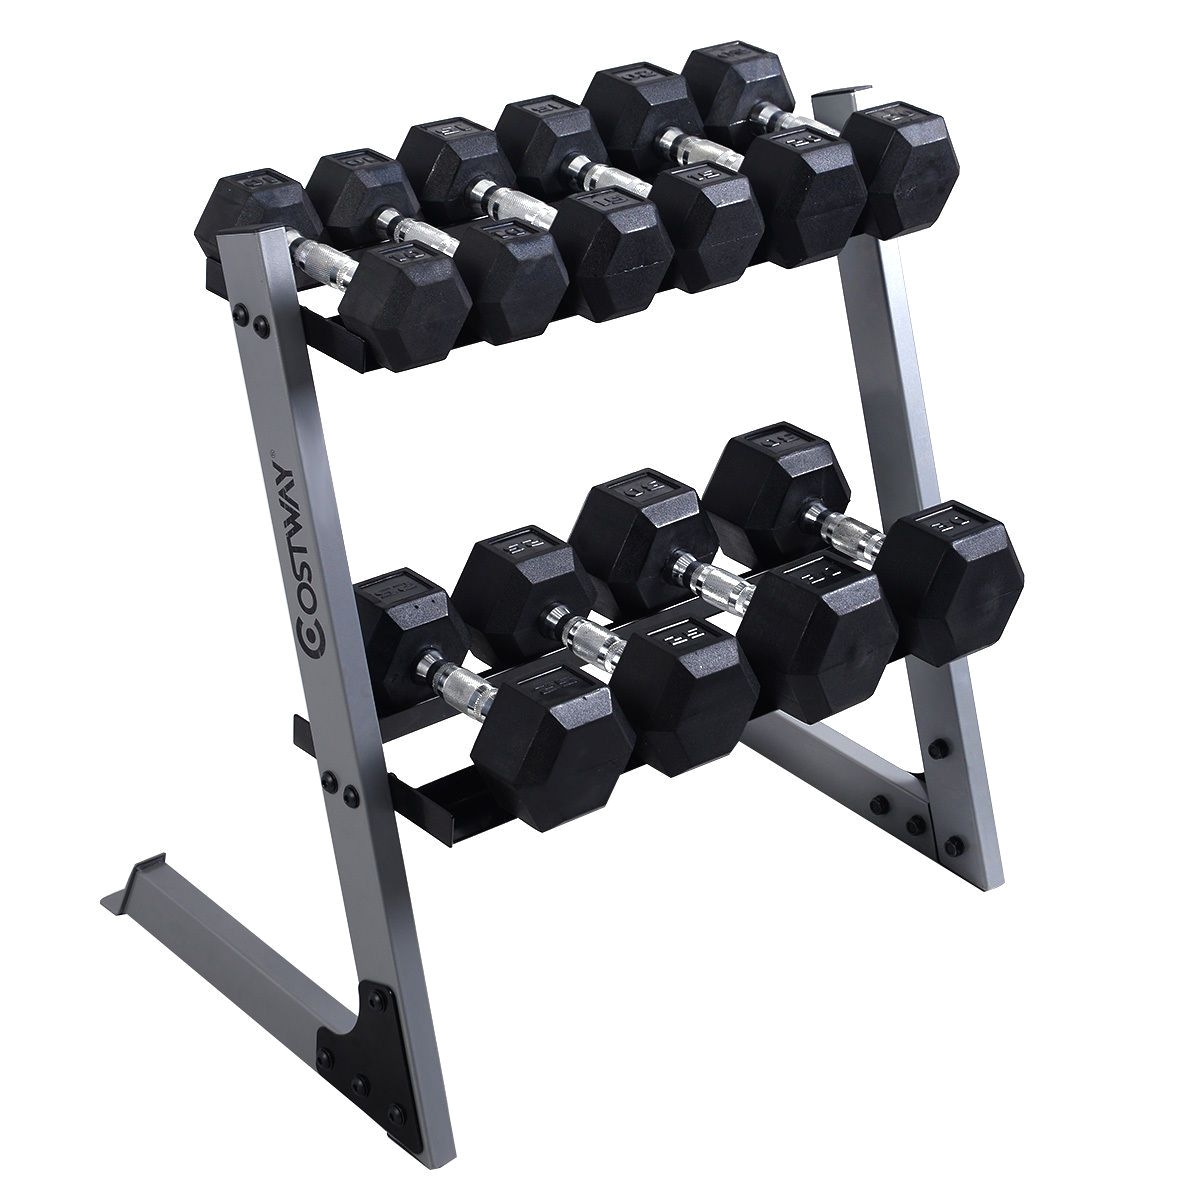 2 tier 29 dumbbell weight storage rack home stand base multiple weights set